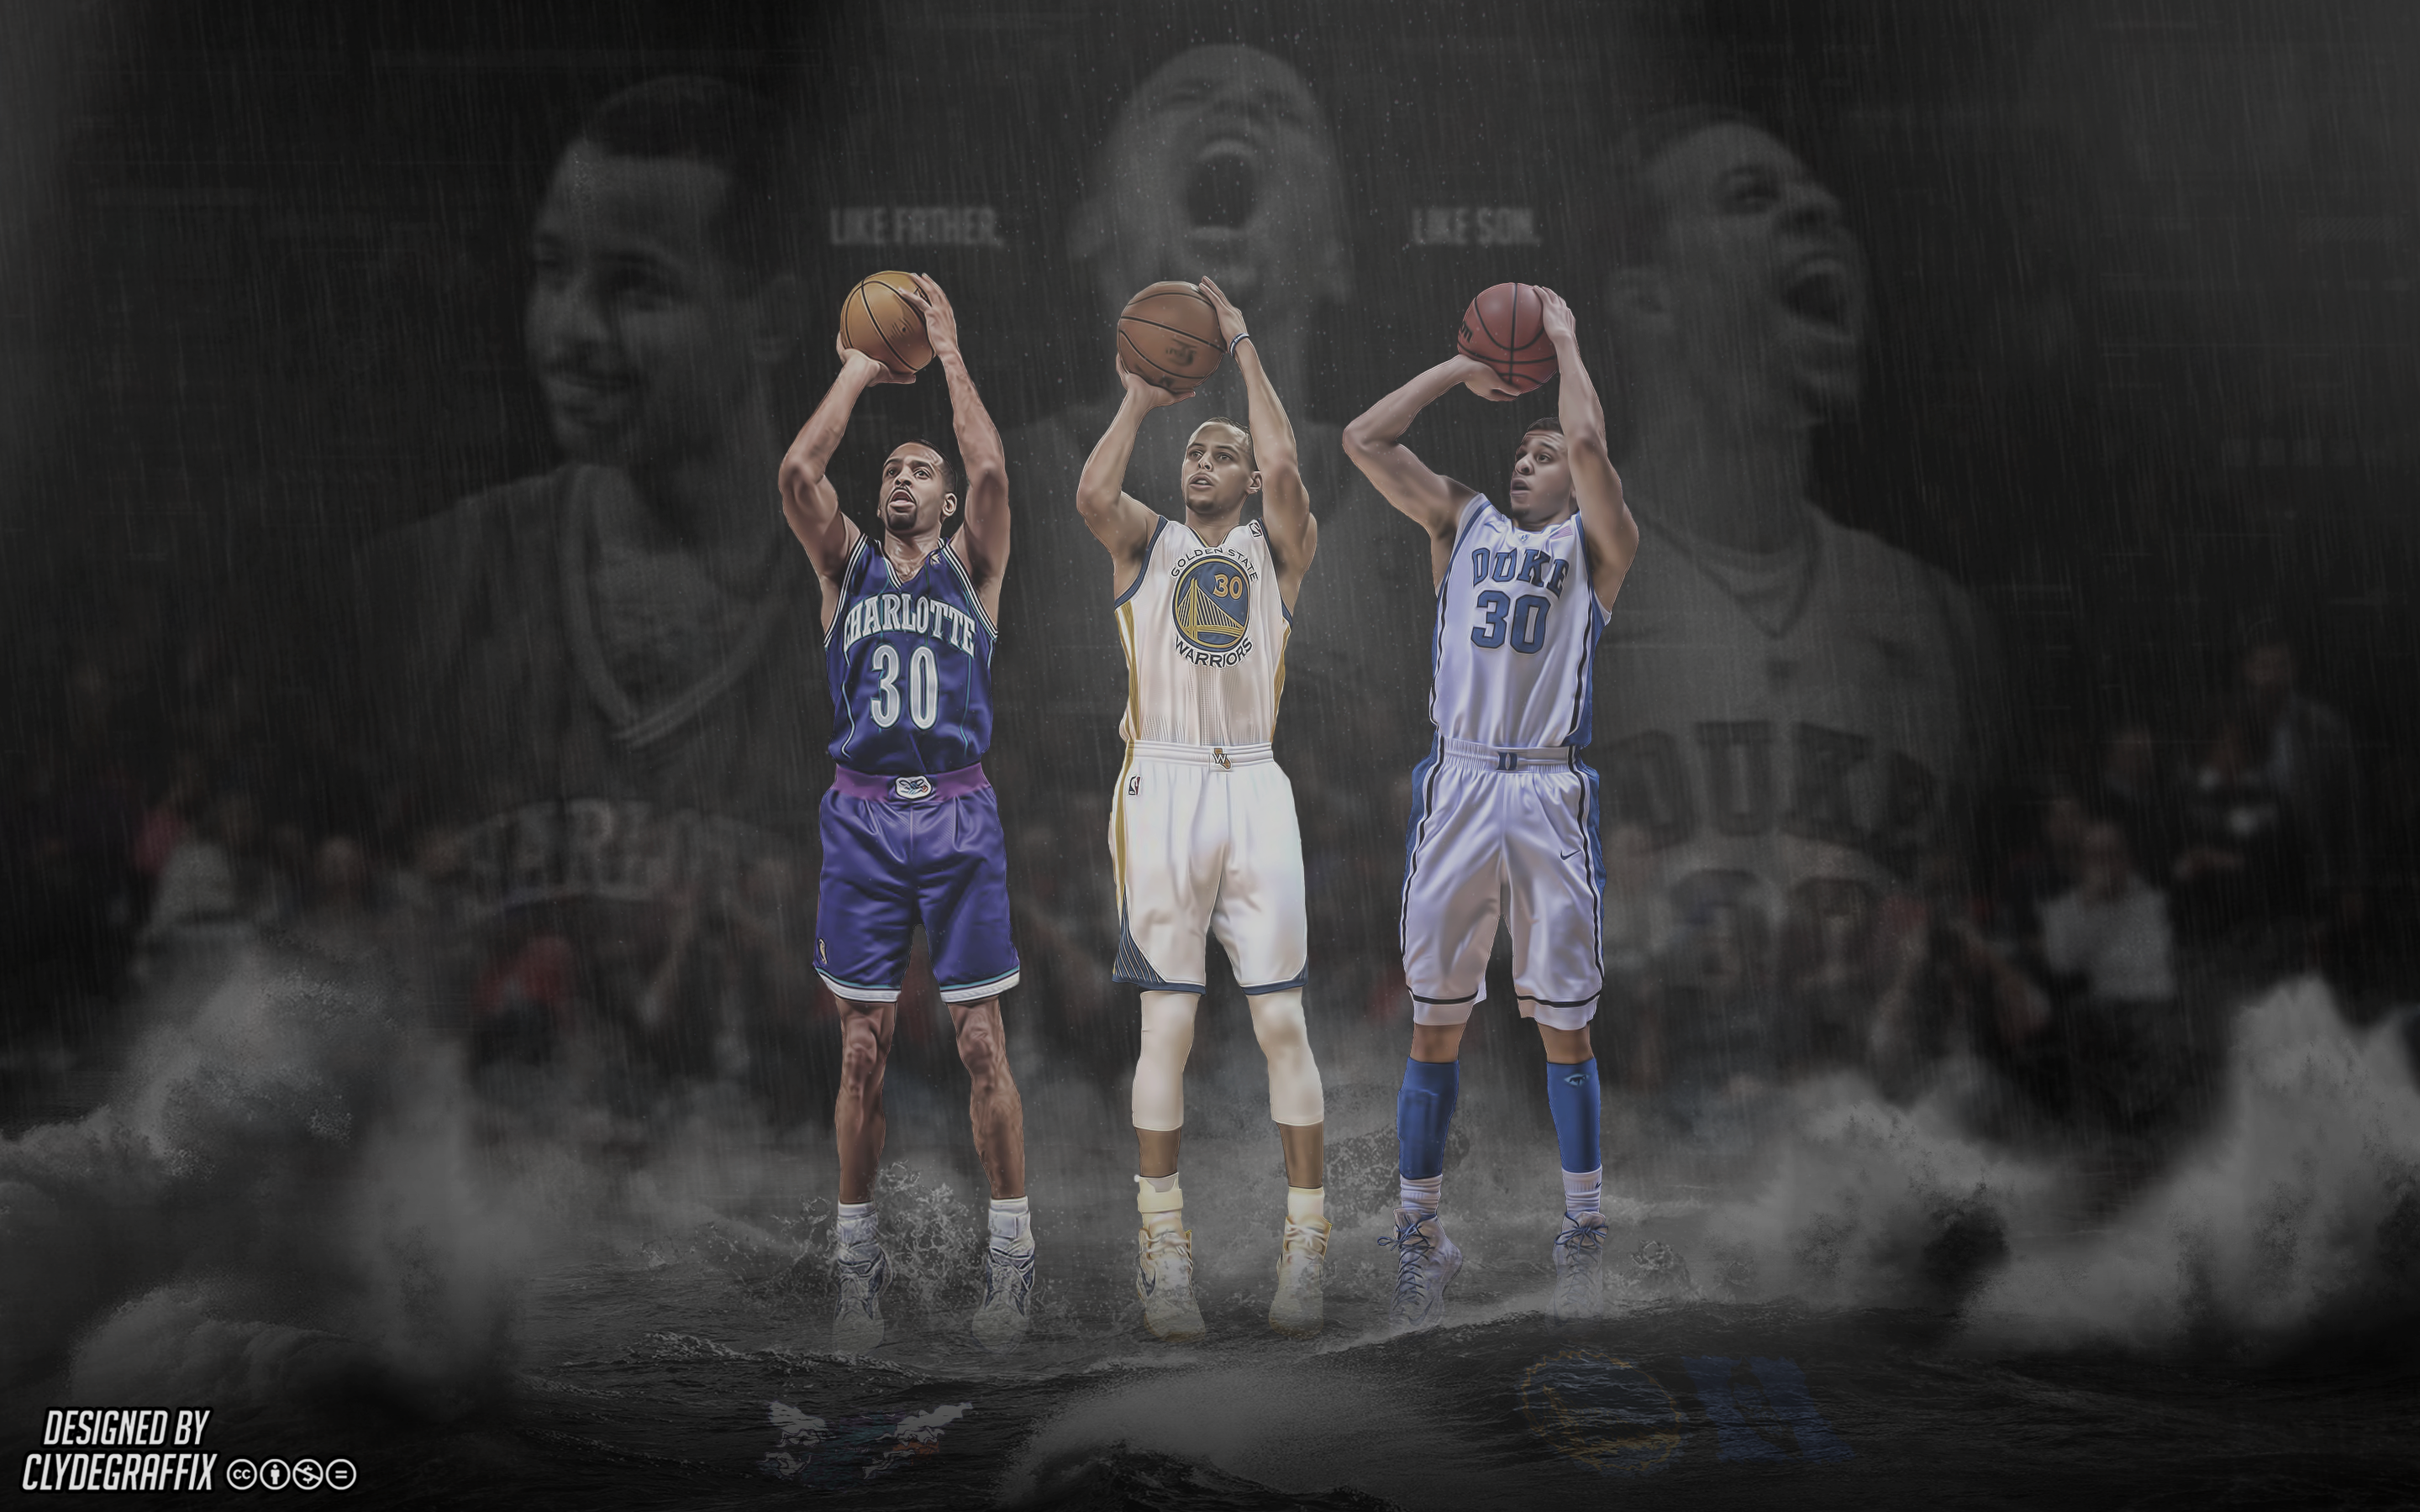 Seth Curry Wallpapers